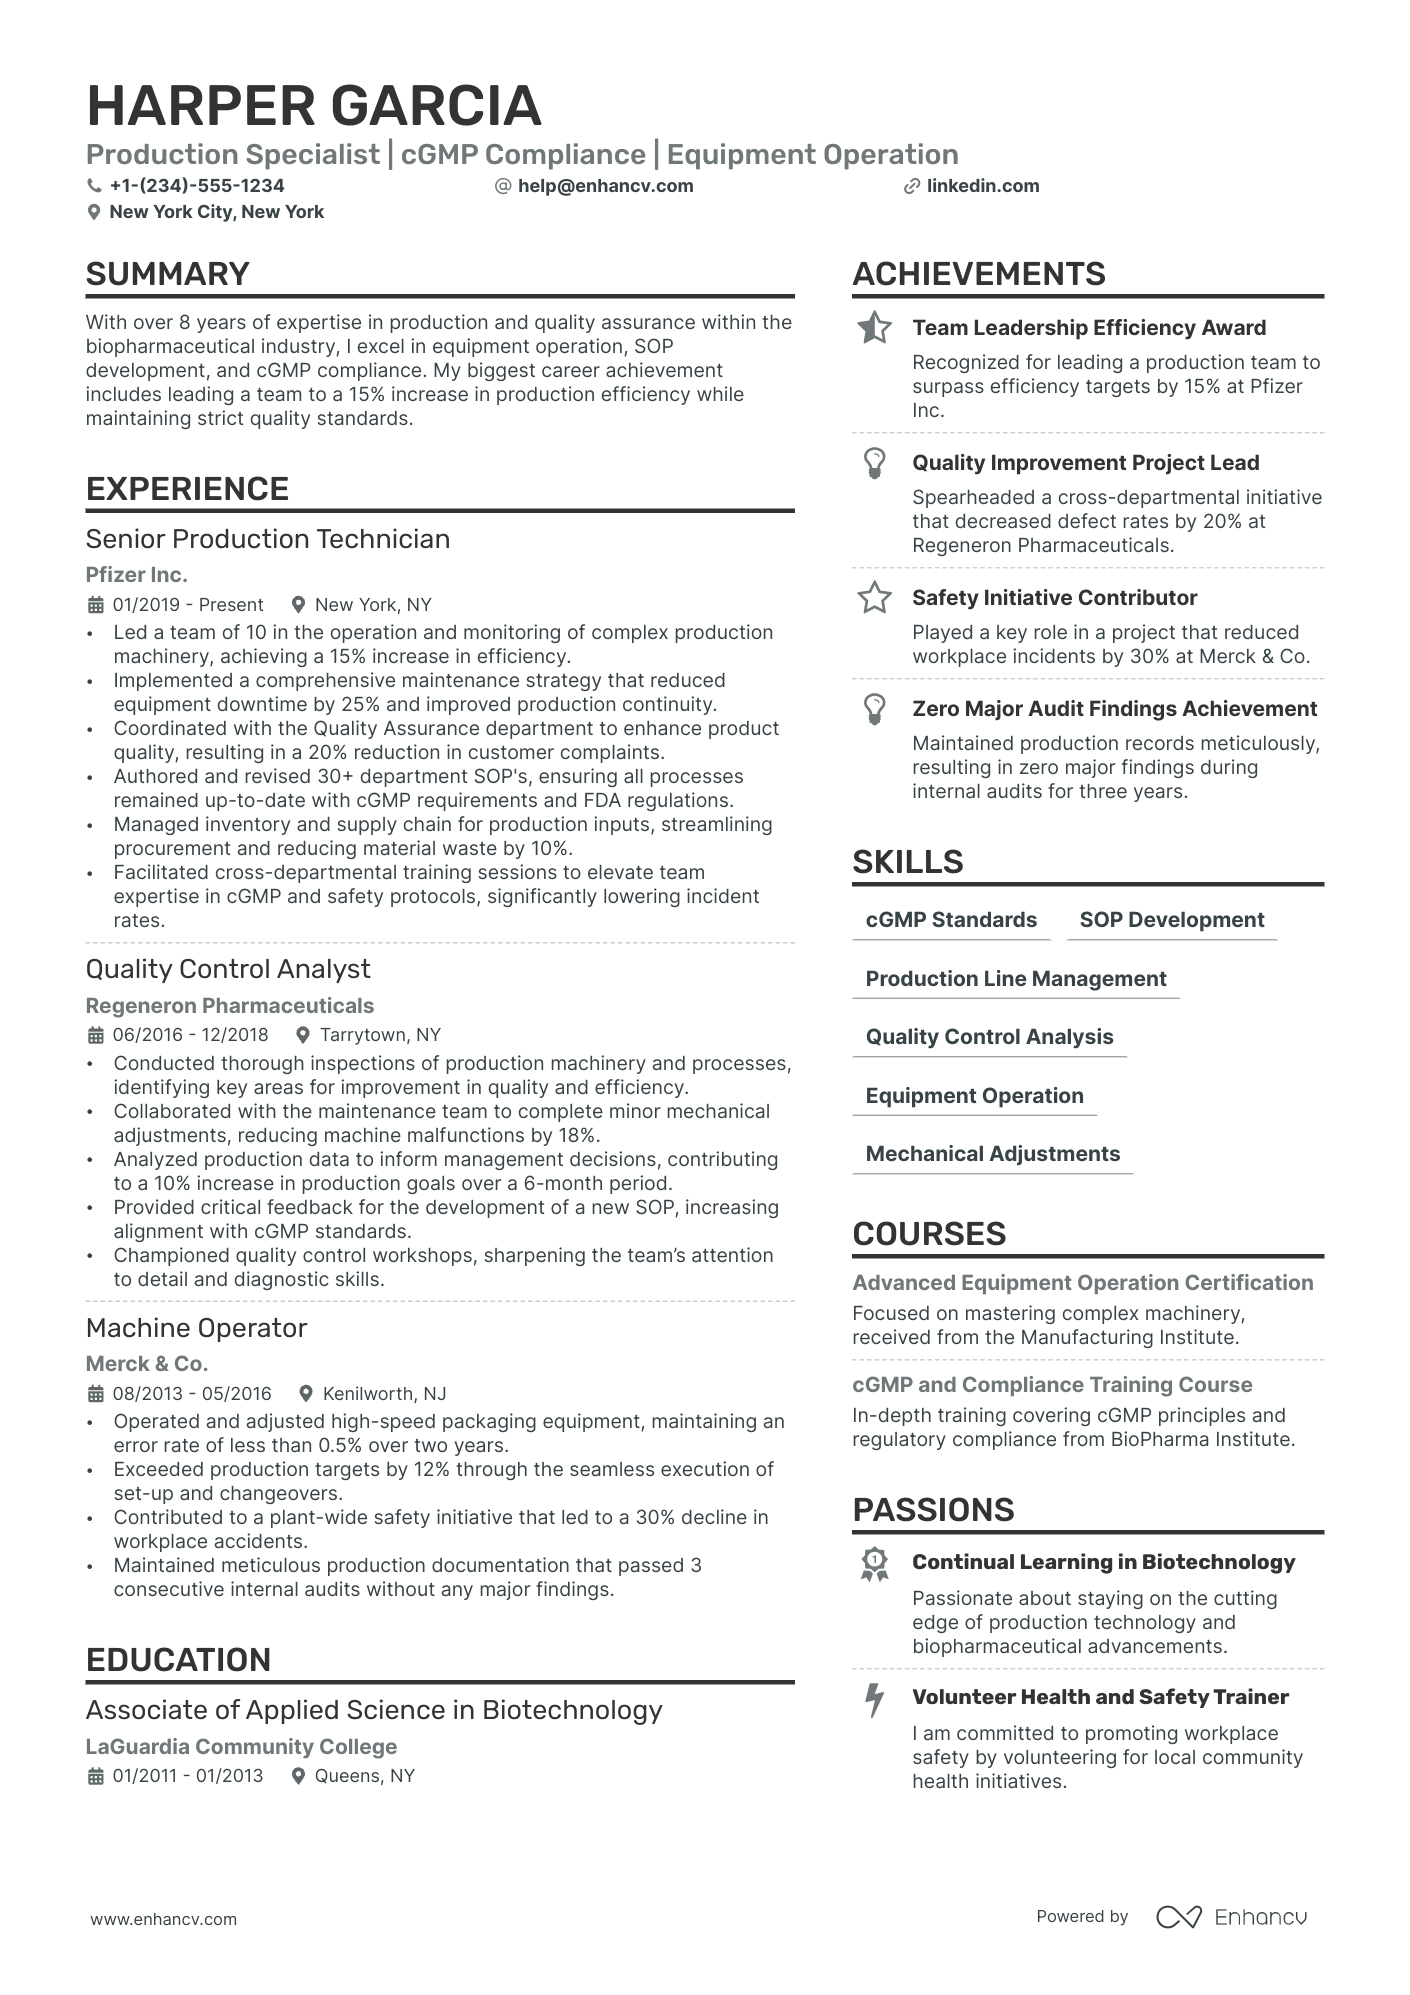 Manufacturing Technician resume example